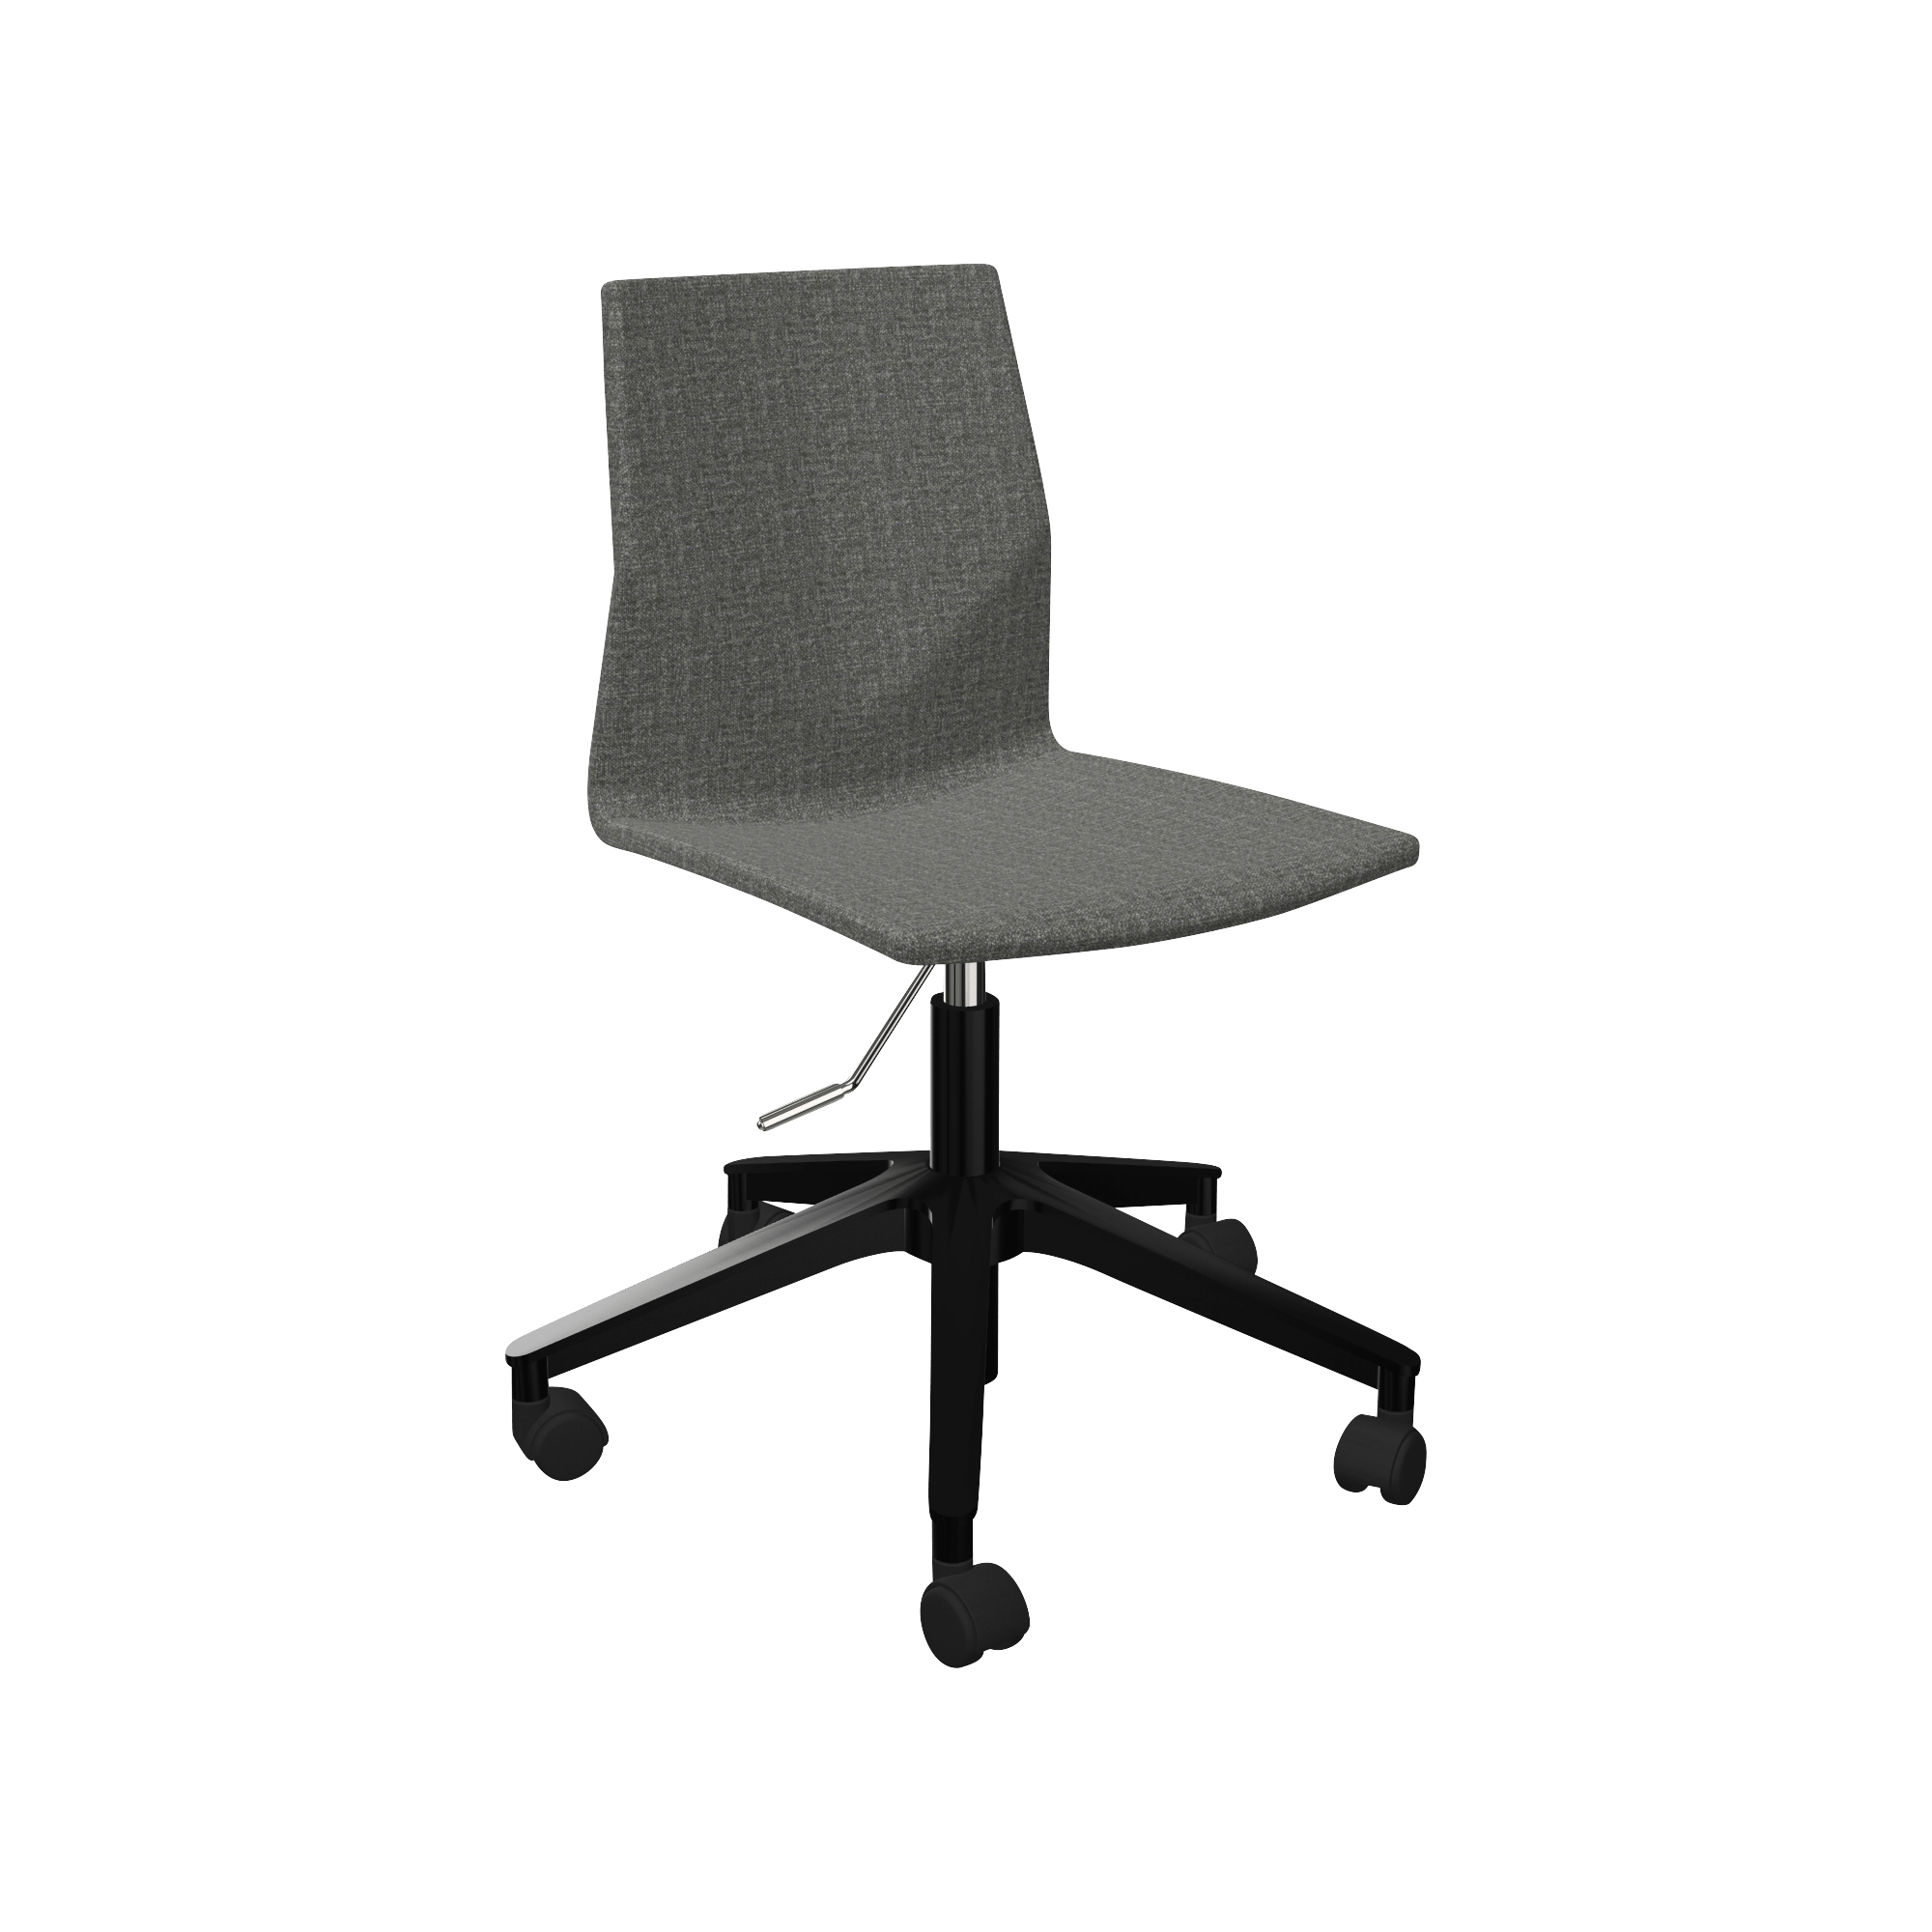 A grey office chair on casters.